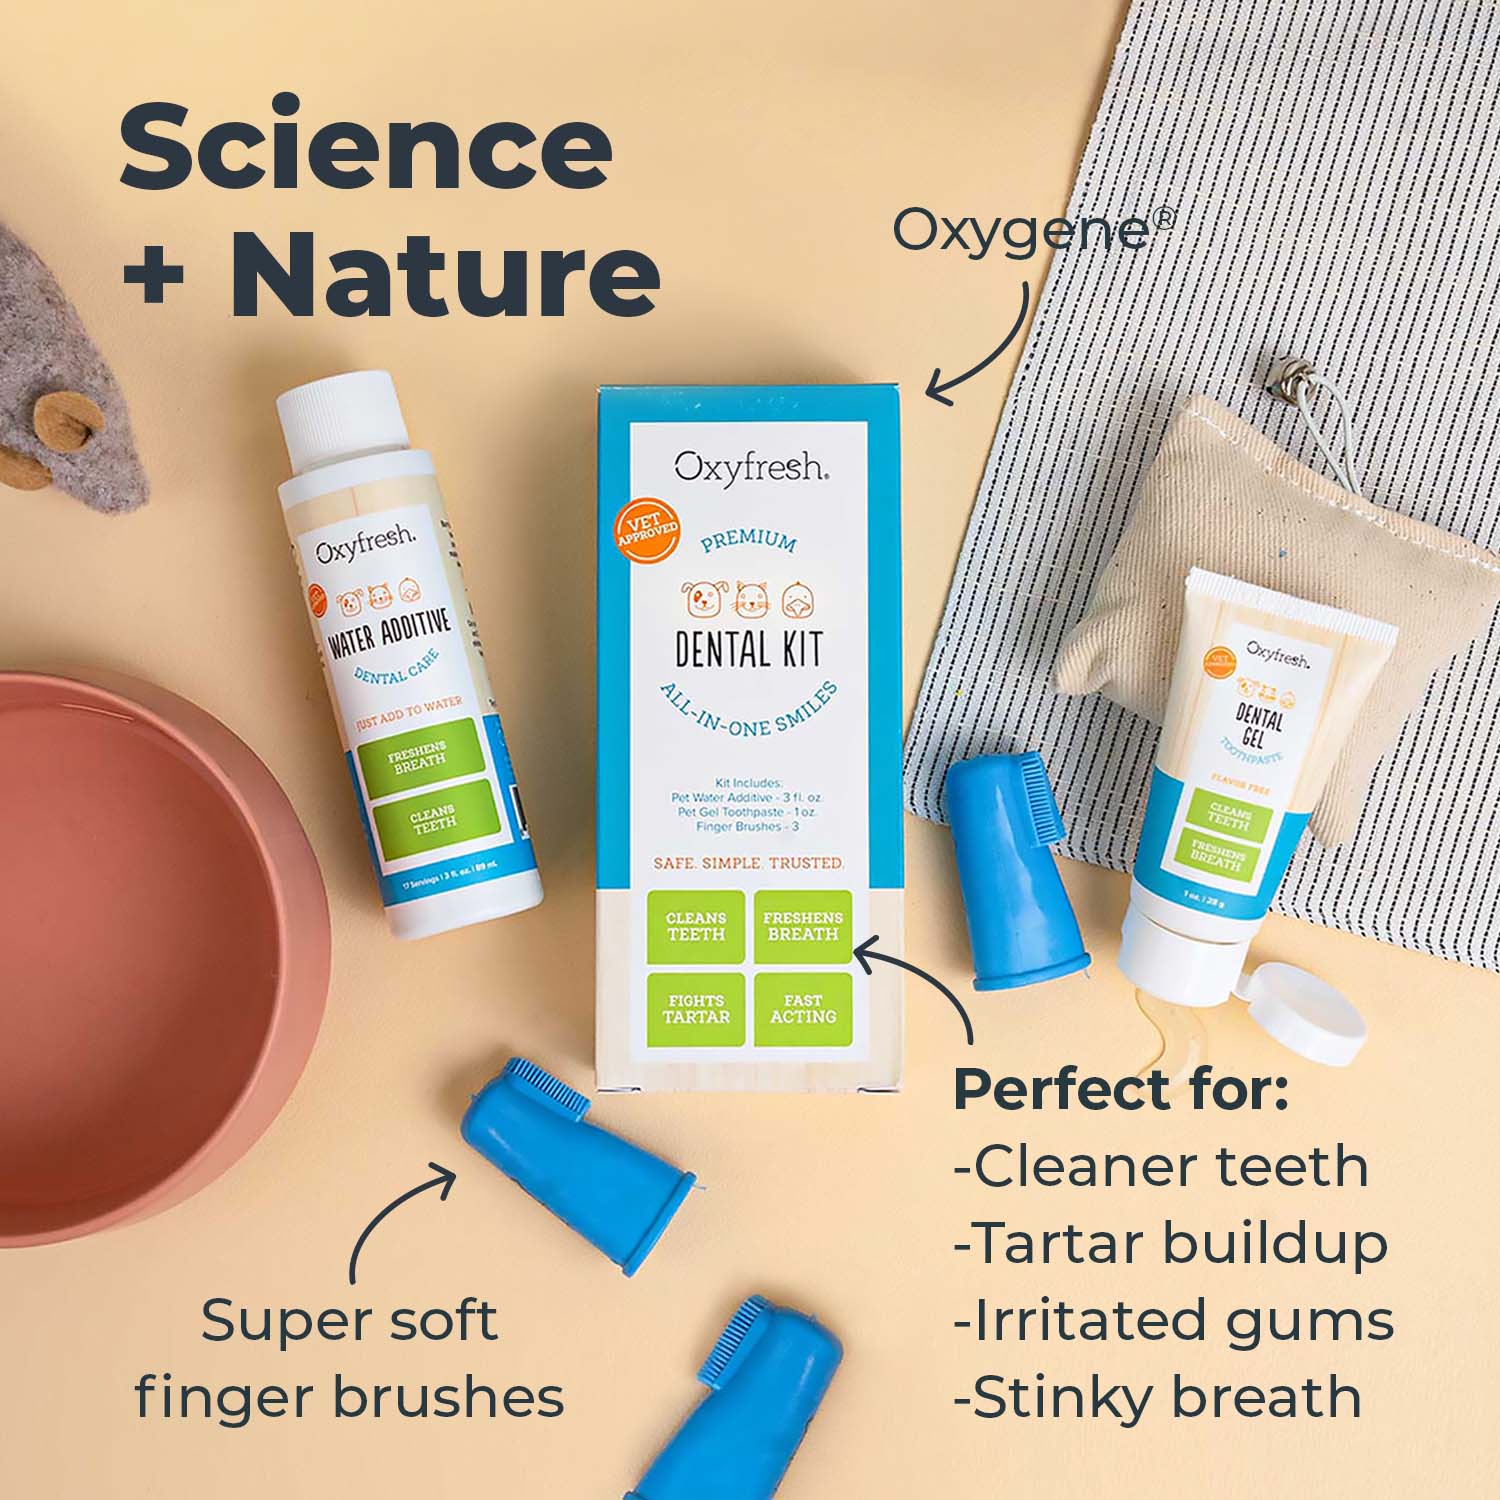 oxyfresh small pet dental kit is perfect for cleaner teeth tartar buildup irritated gums and stinky breath